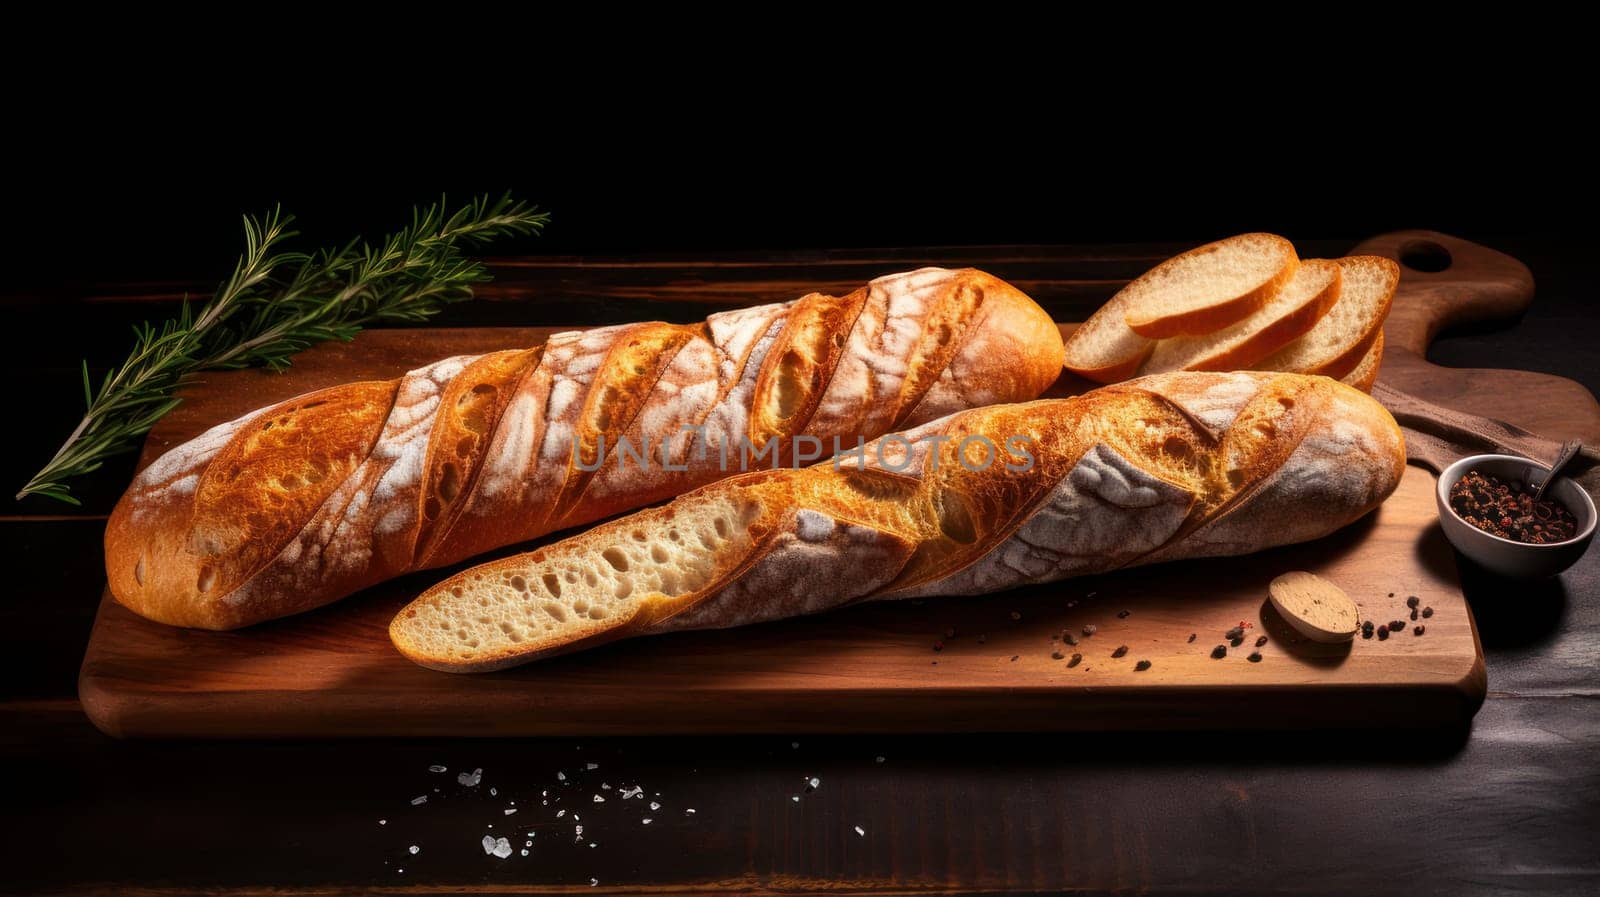 Fresh fragrant, still life with French baguettes from fresh bread with poolish on a wooden cutting board and wheat.n. Fresh classic pastries. by Alla_Yurtayeva